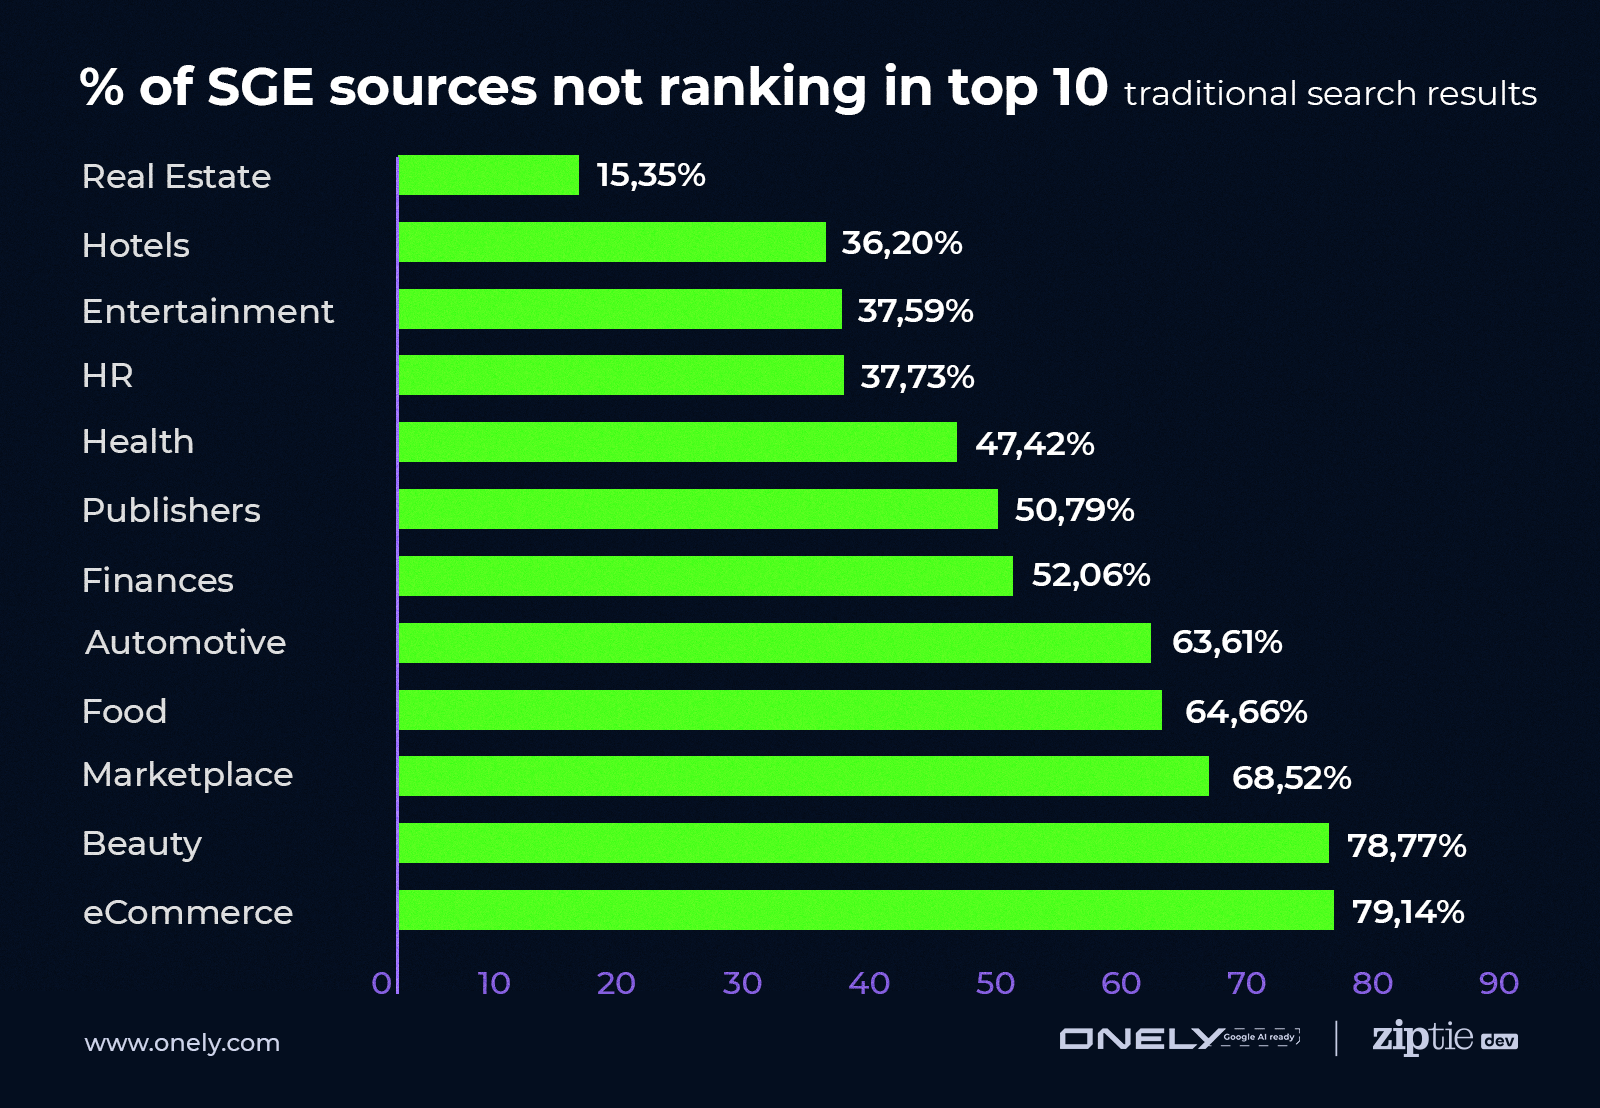 % of SGE sources not ranked in the top 10